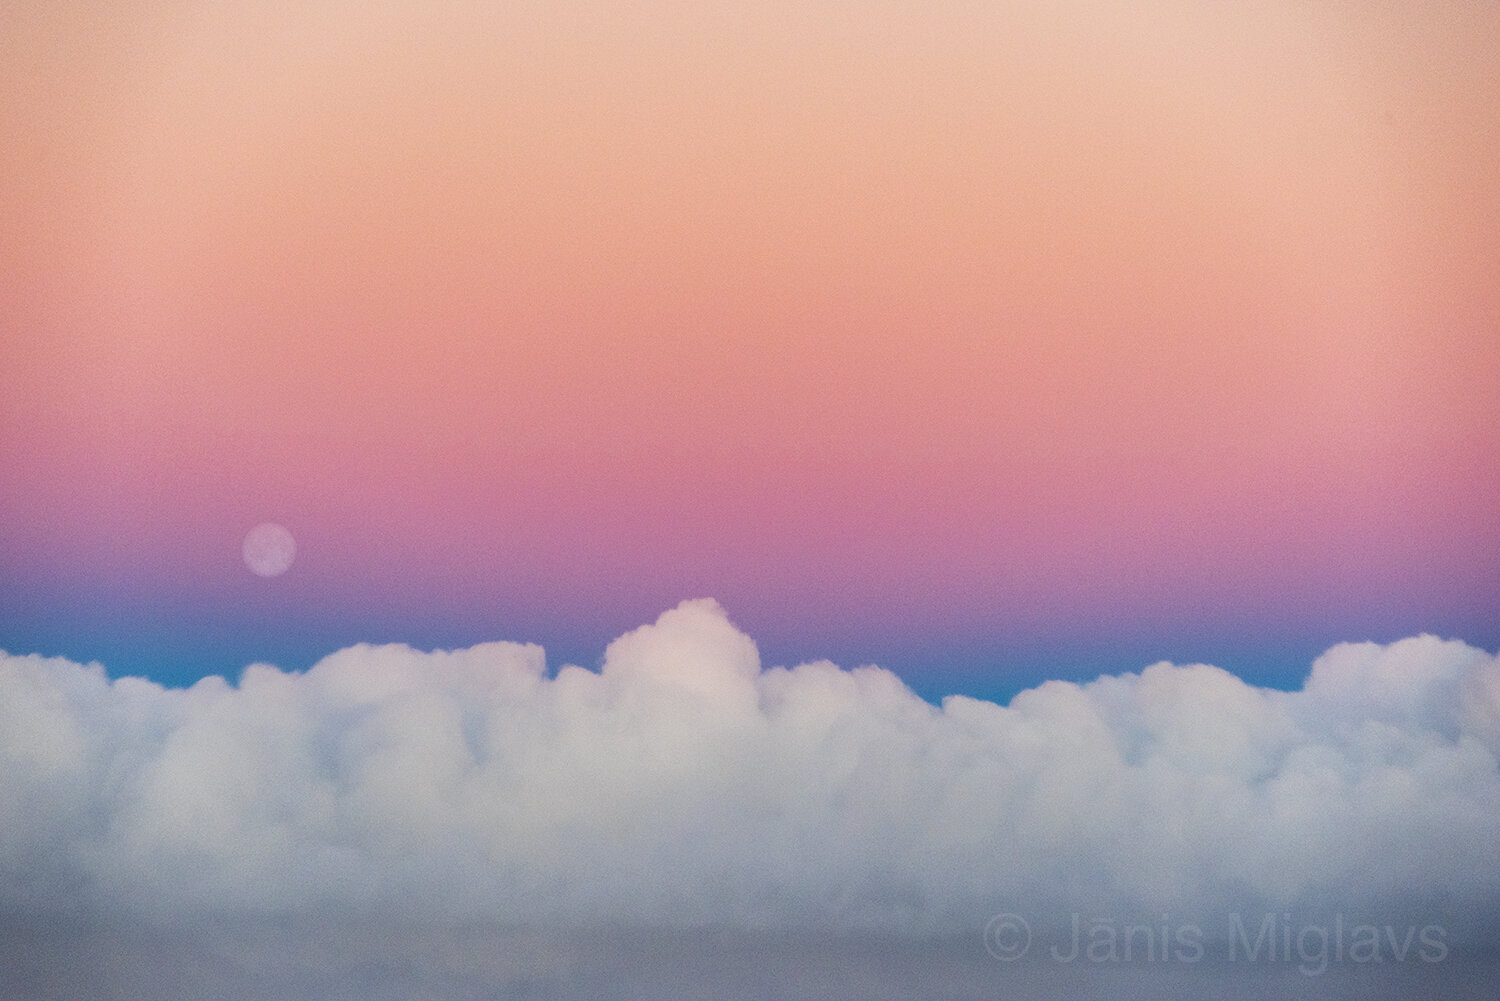 Moonrise above Clouds